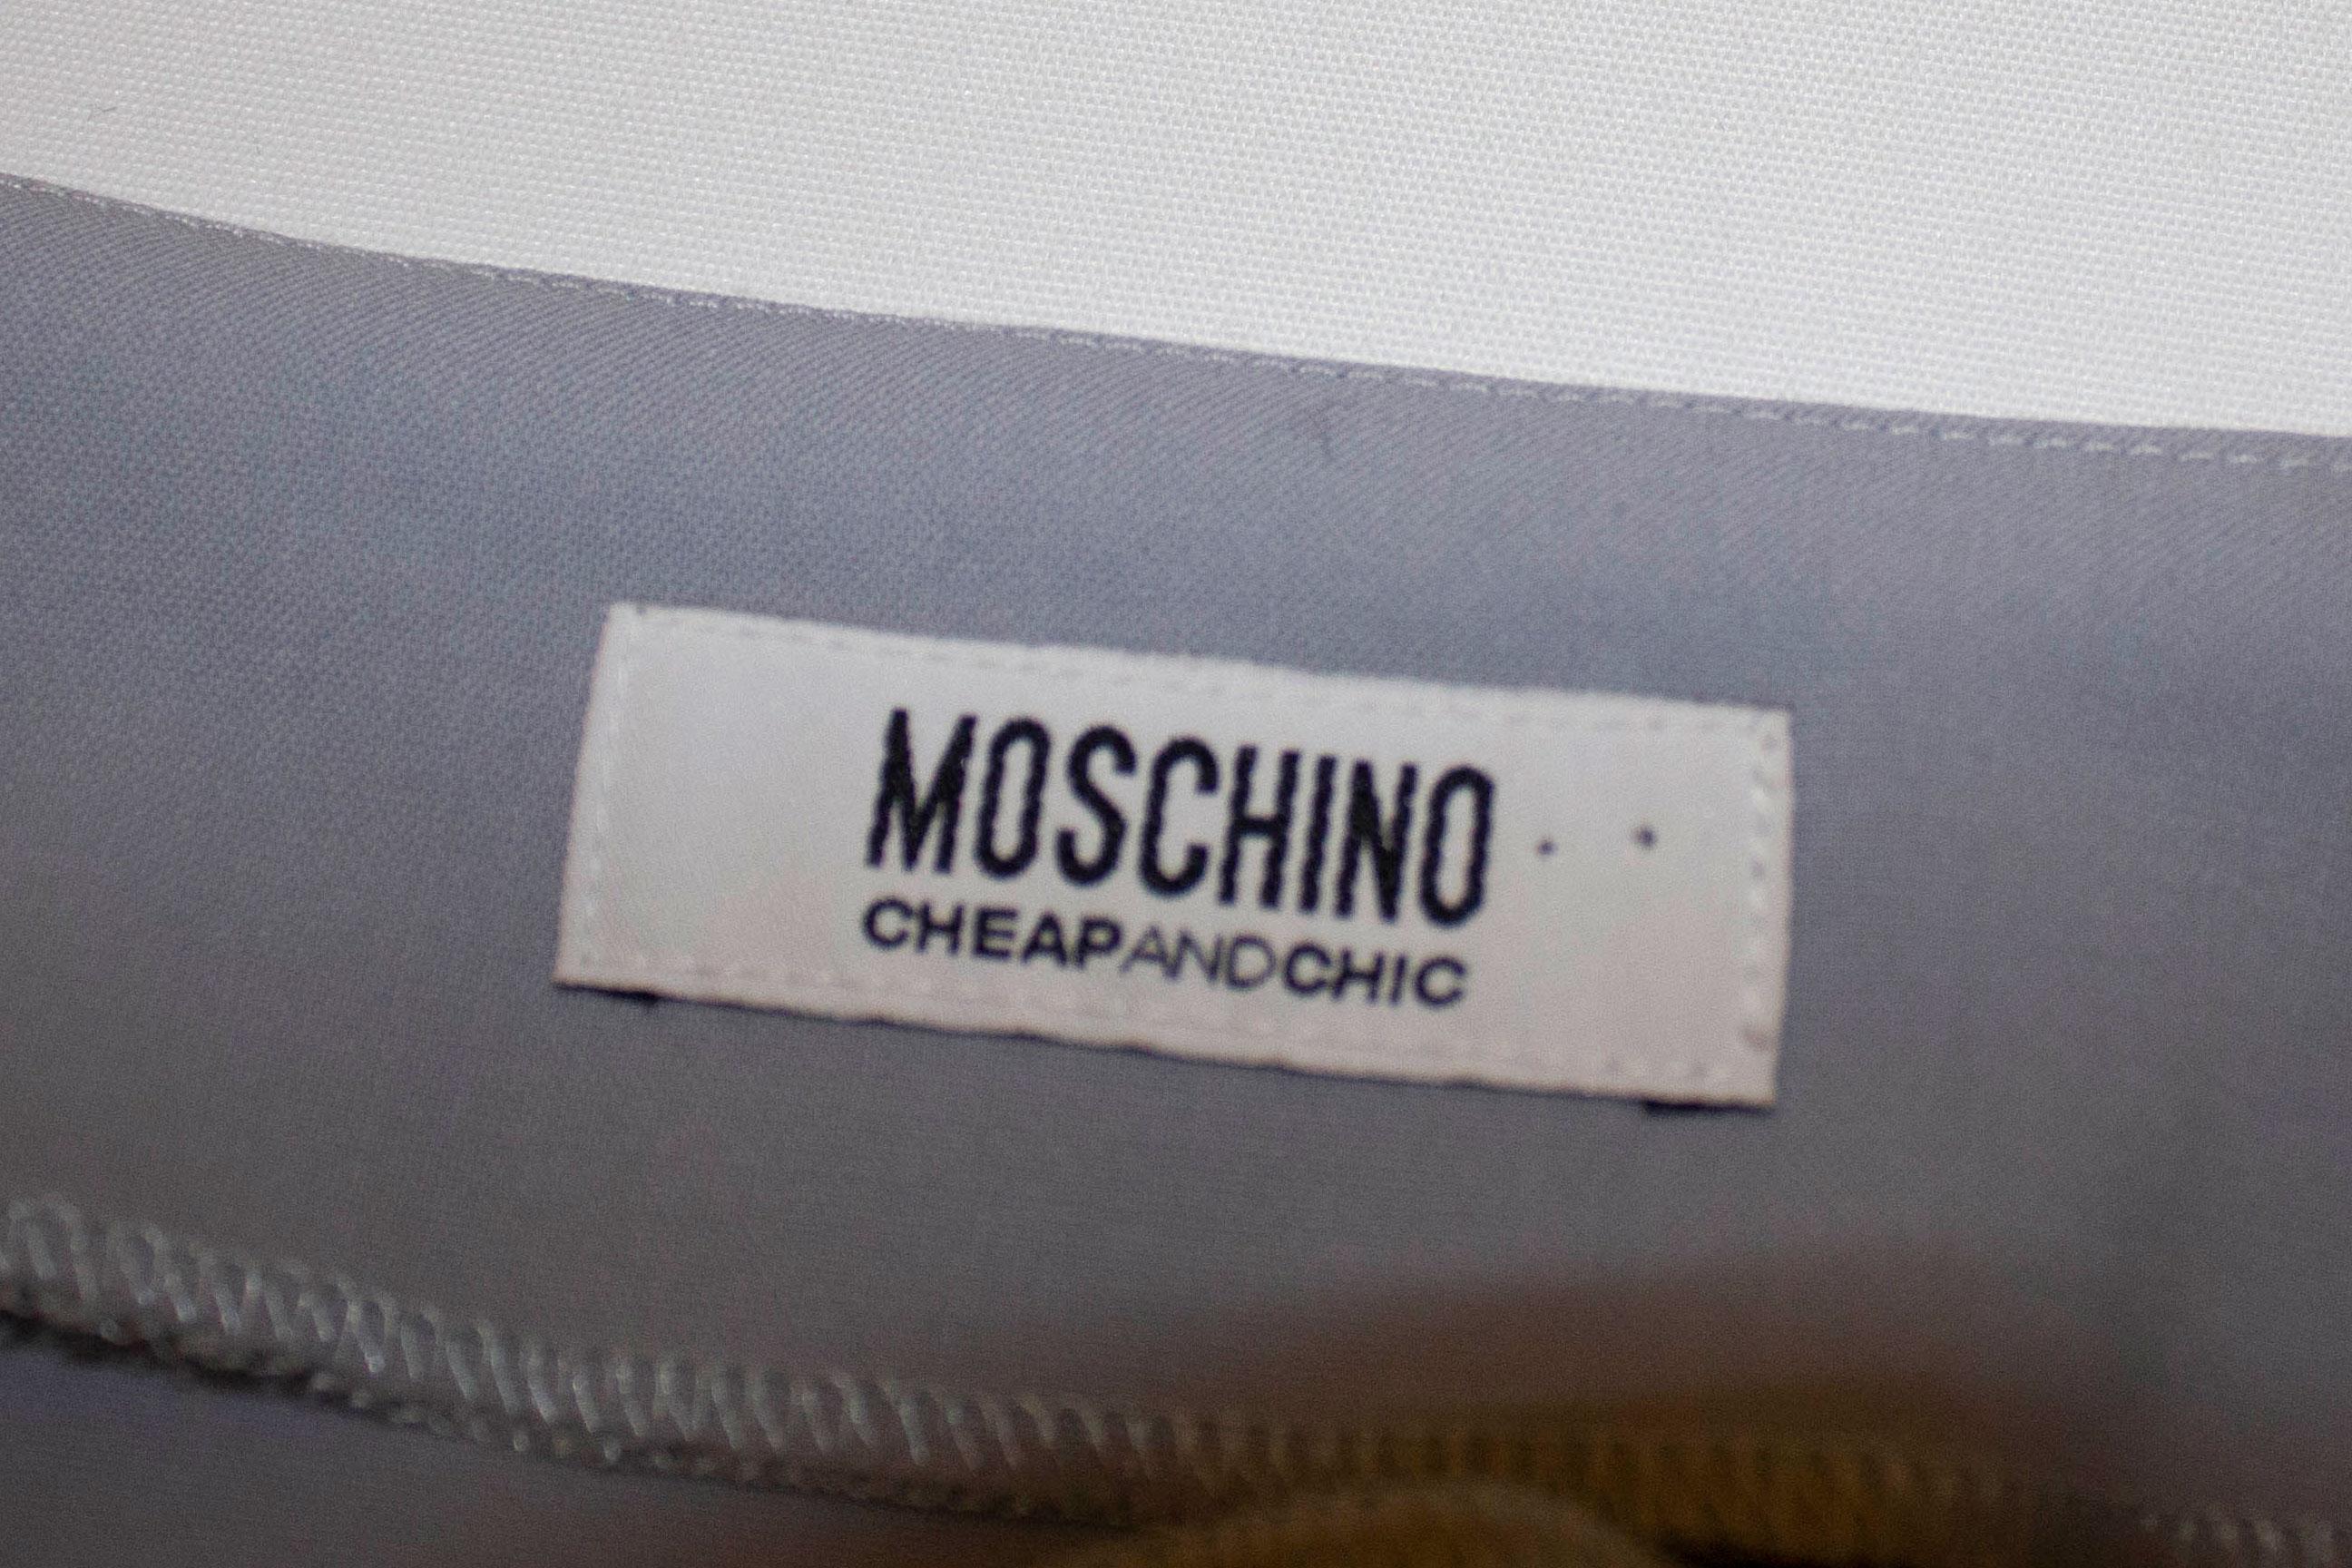 A pretty skirt suit by Moschino . In a  pretty powder blue wool with silver trim , the jacket has a three button fastening and button cuffs. The short skirt is unlined. Size UK 8
Meaurements: Jacket bust 34'', length 23 Skirt waist 26'', length 17''